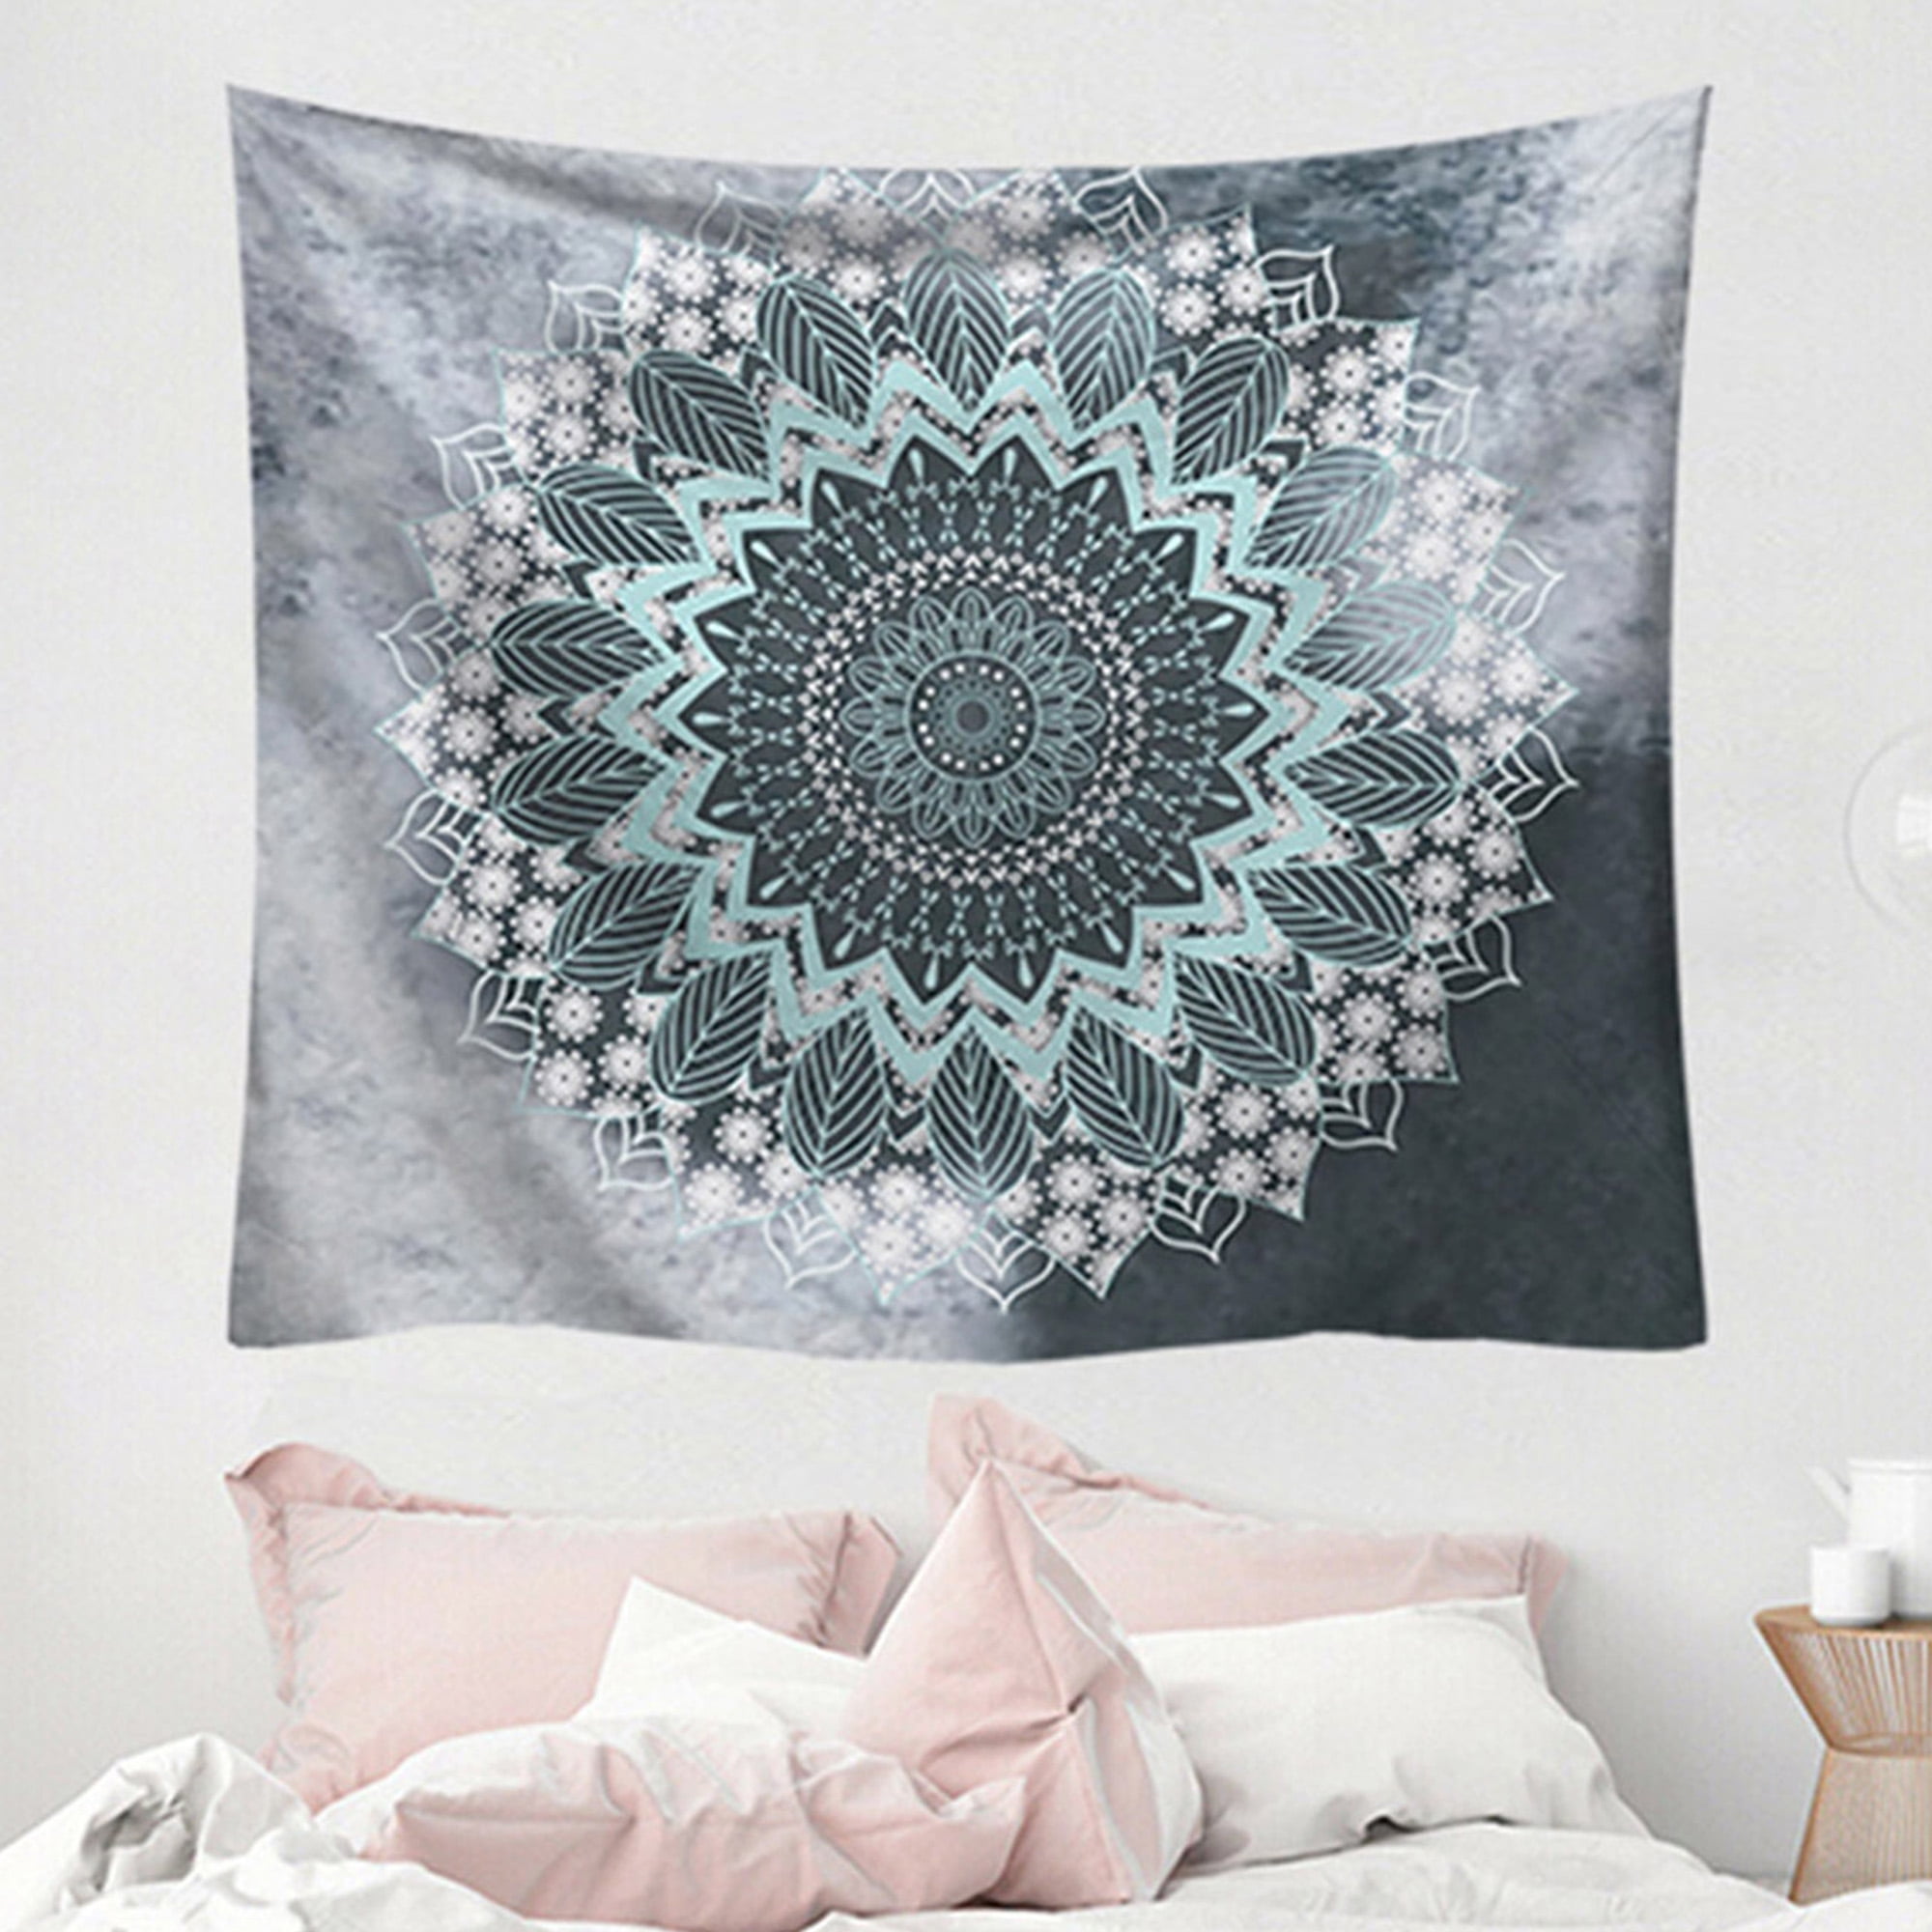 Lifeel White Bohemian Tapestry Wall Hanging Mandala Floral Medallion Hippie Tapestry with Light Brown Aesthetic Wreath Design Cream Wall Decor Blanket for Bedroom Home Dorm Small 50×60 inches 